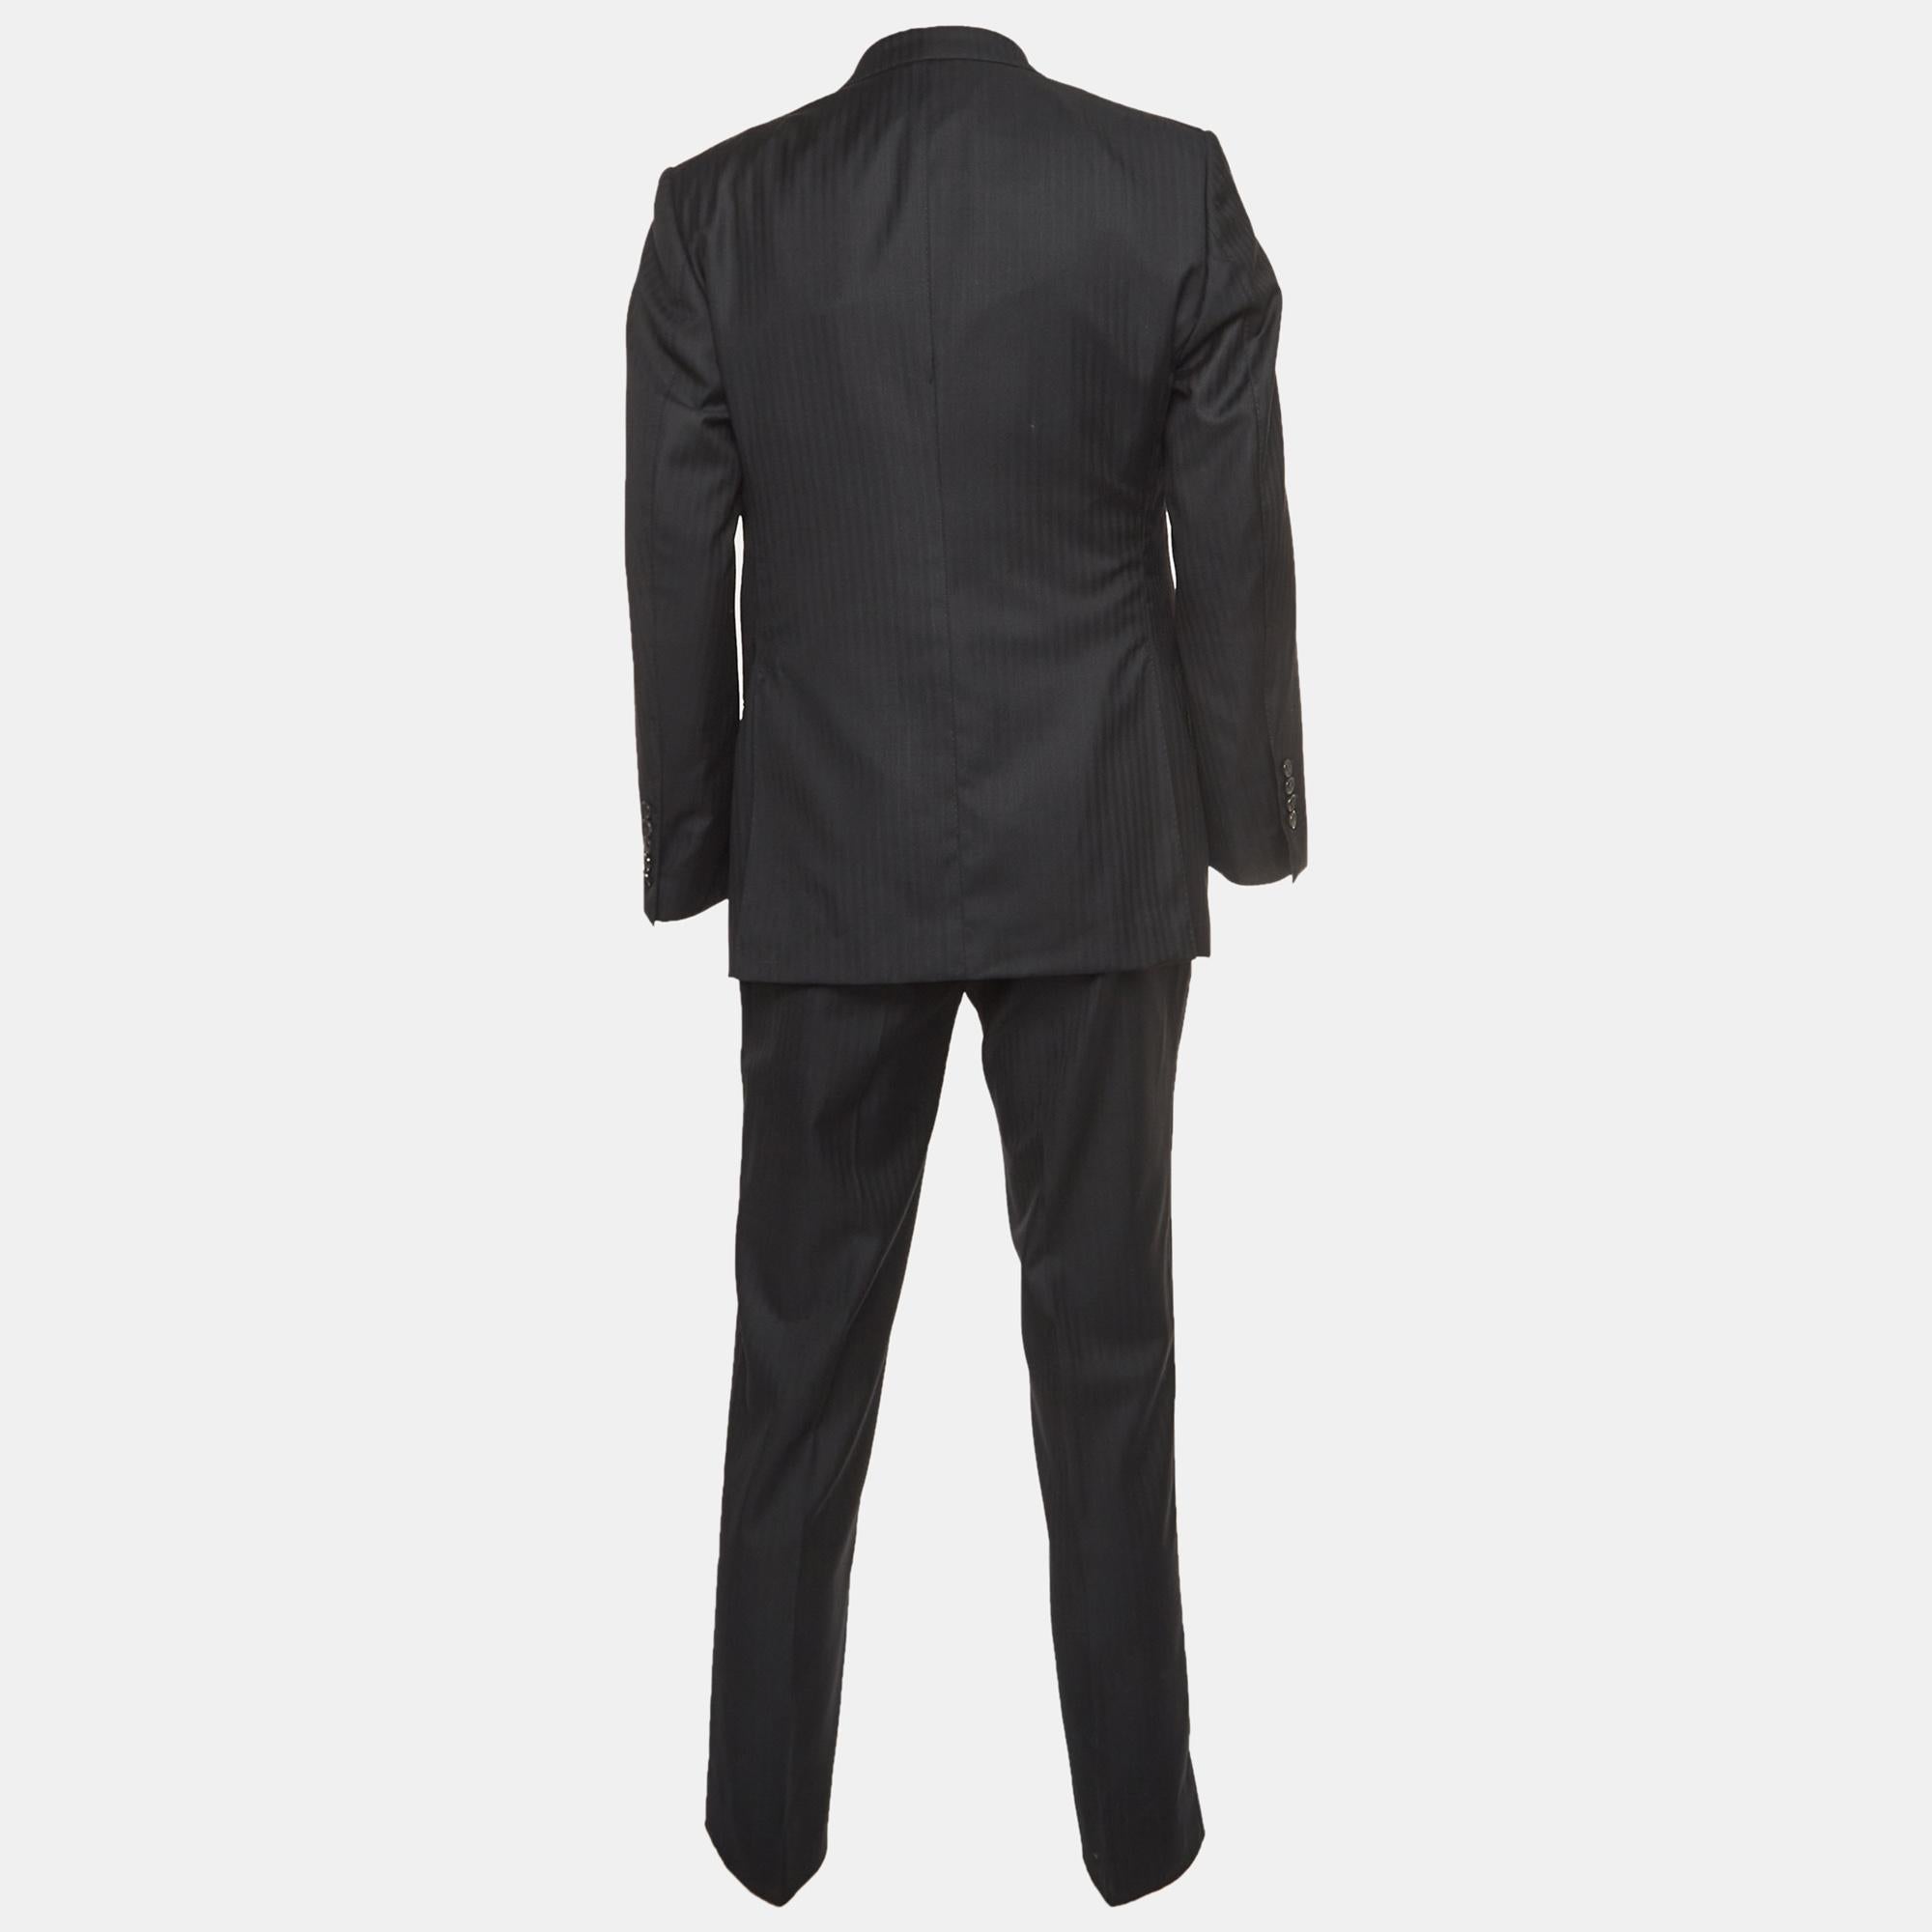 Tom Ford Black Pinstripe Wool Single Breasted 3 Piece Suit XL In Good Condition For Sale In Dubai, Al Qouz 2